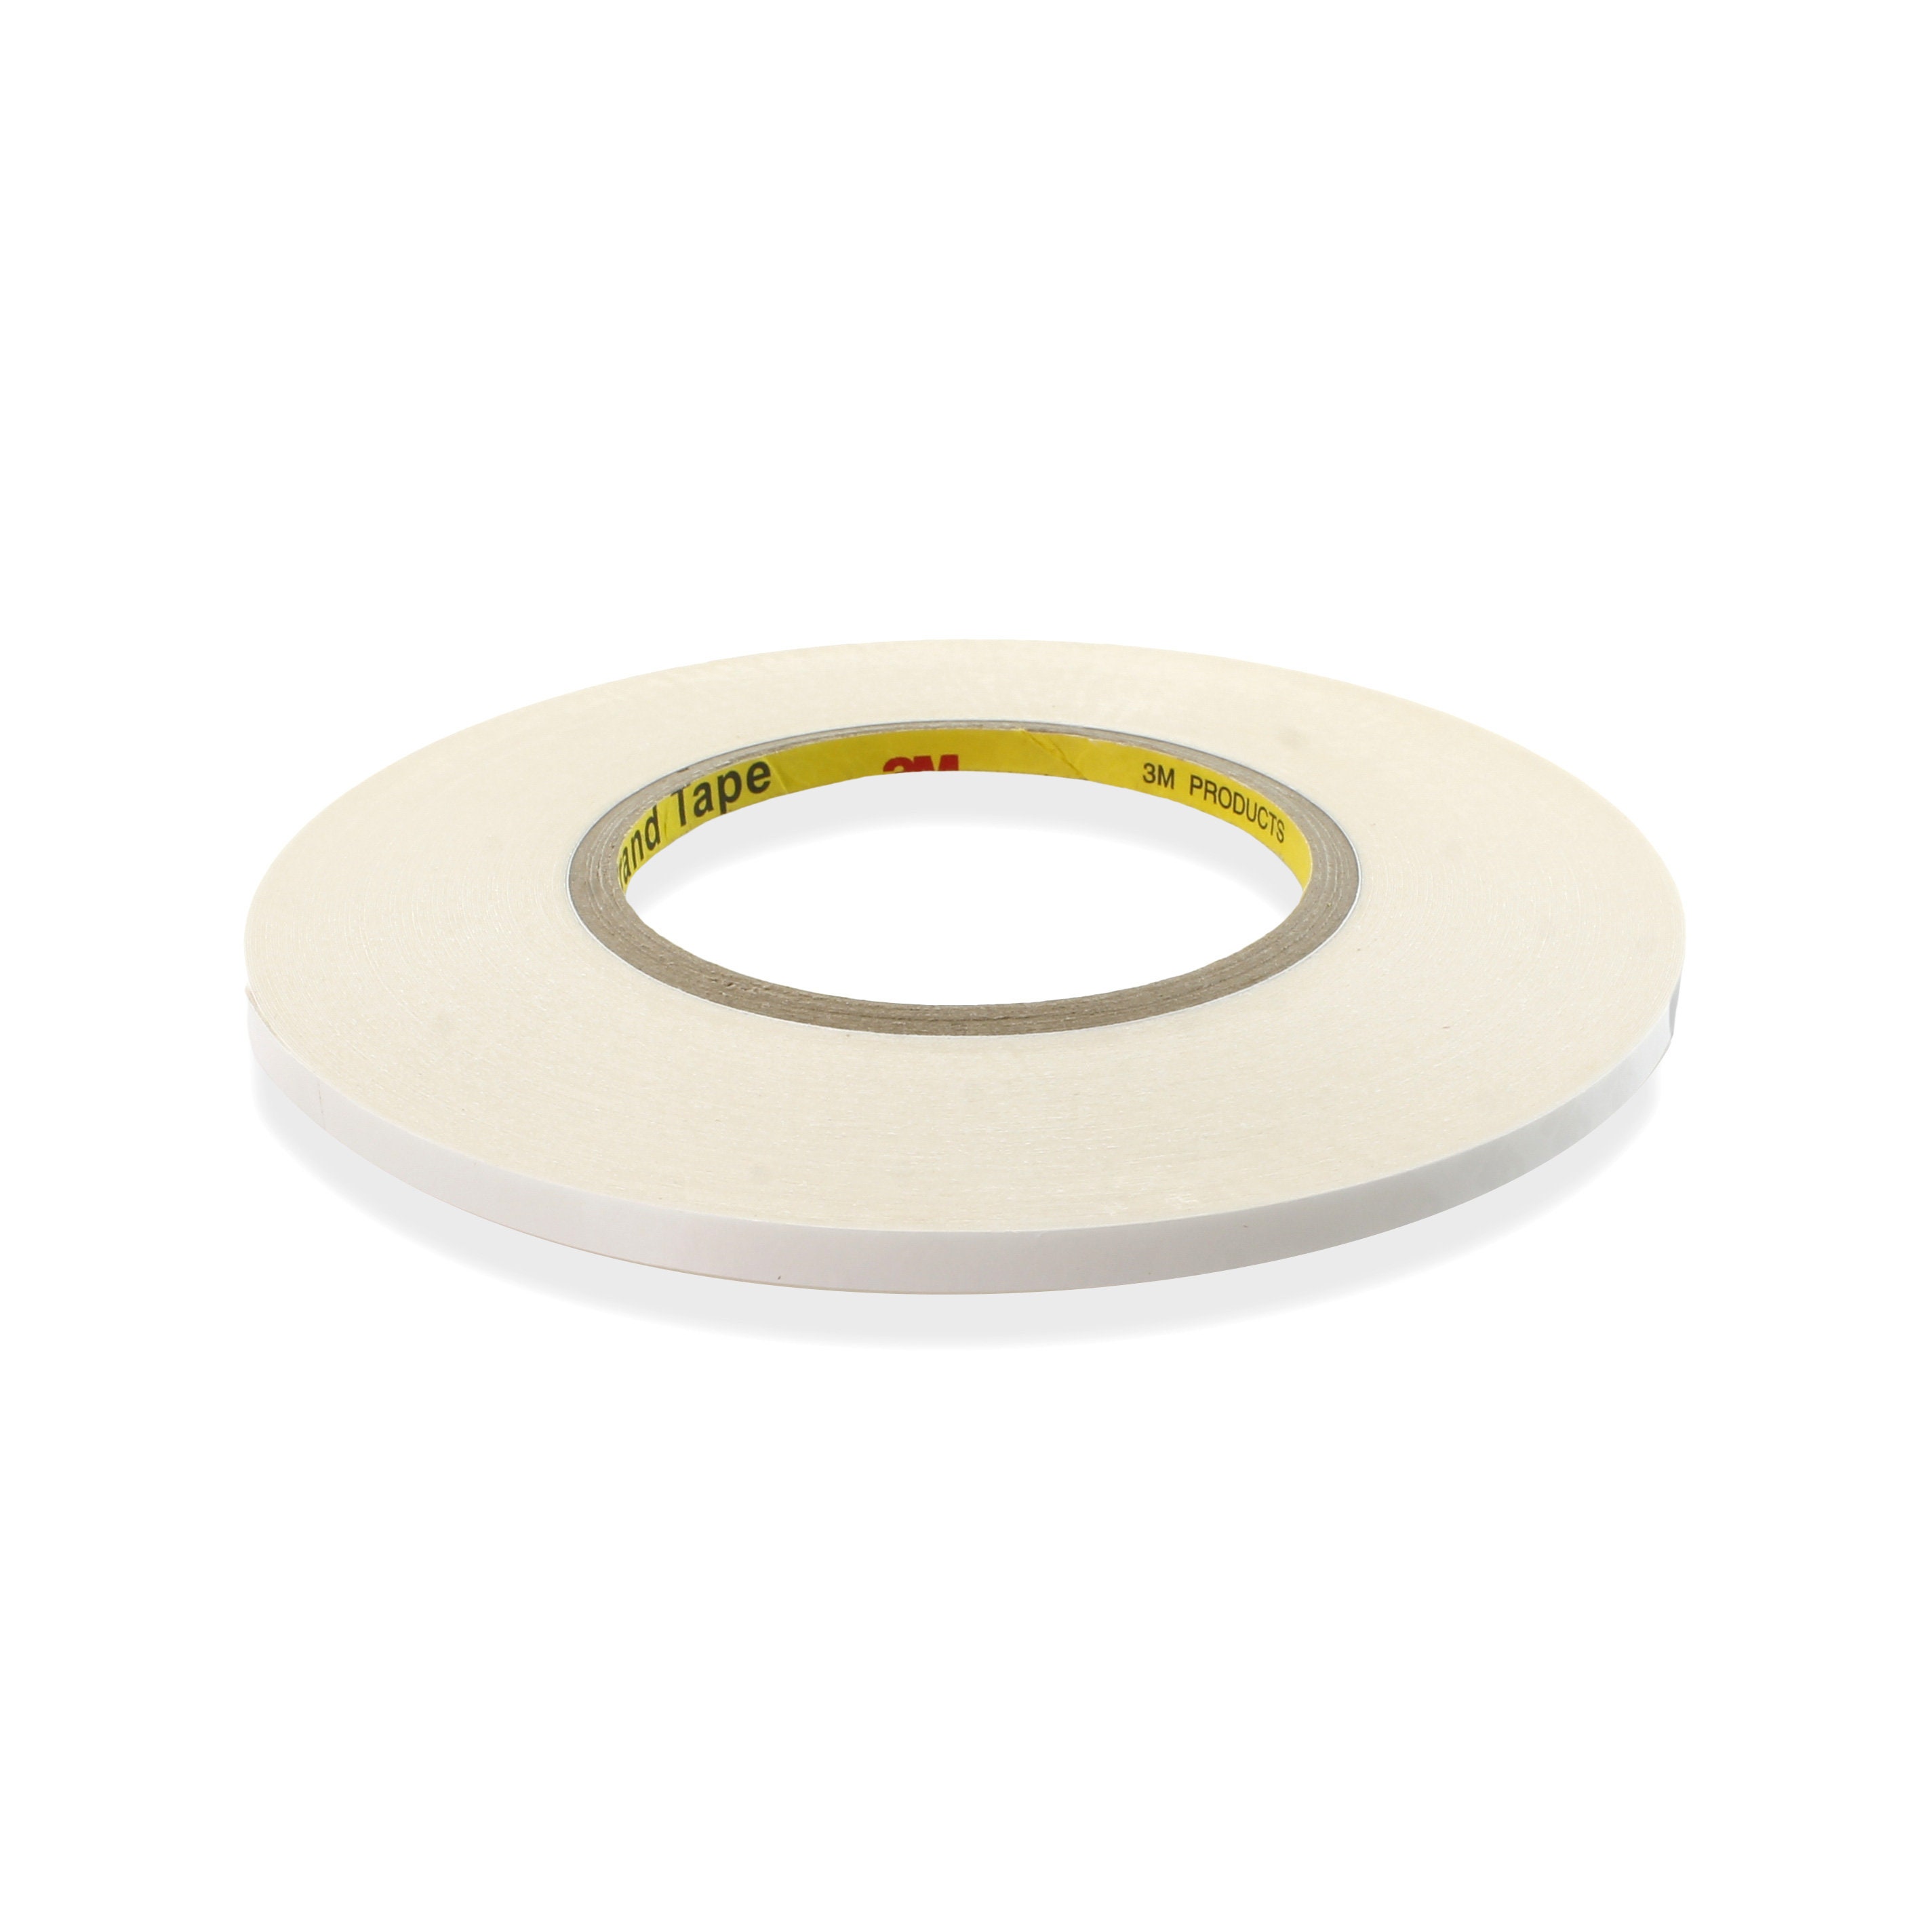 2 Rolls Double Sided Mounting Tape Strong Adhesive Transparent Clear 108 ft x 1 inch, White